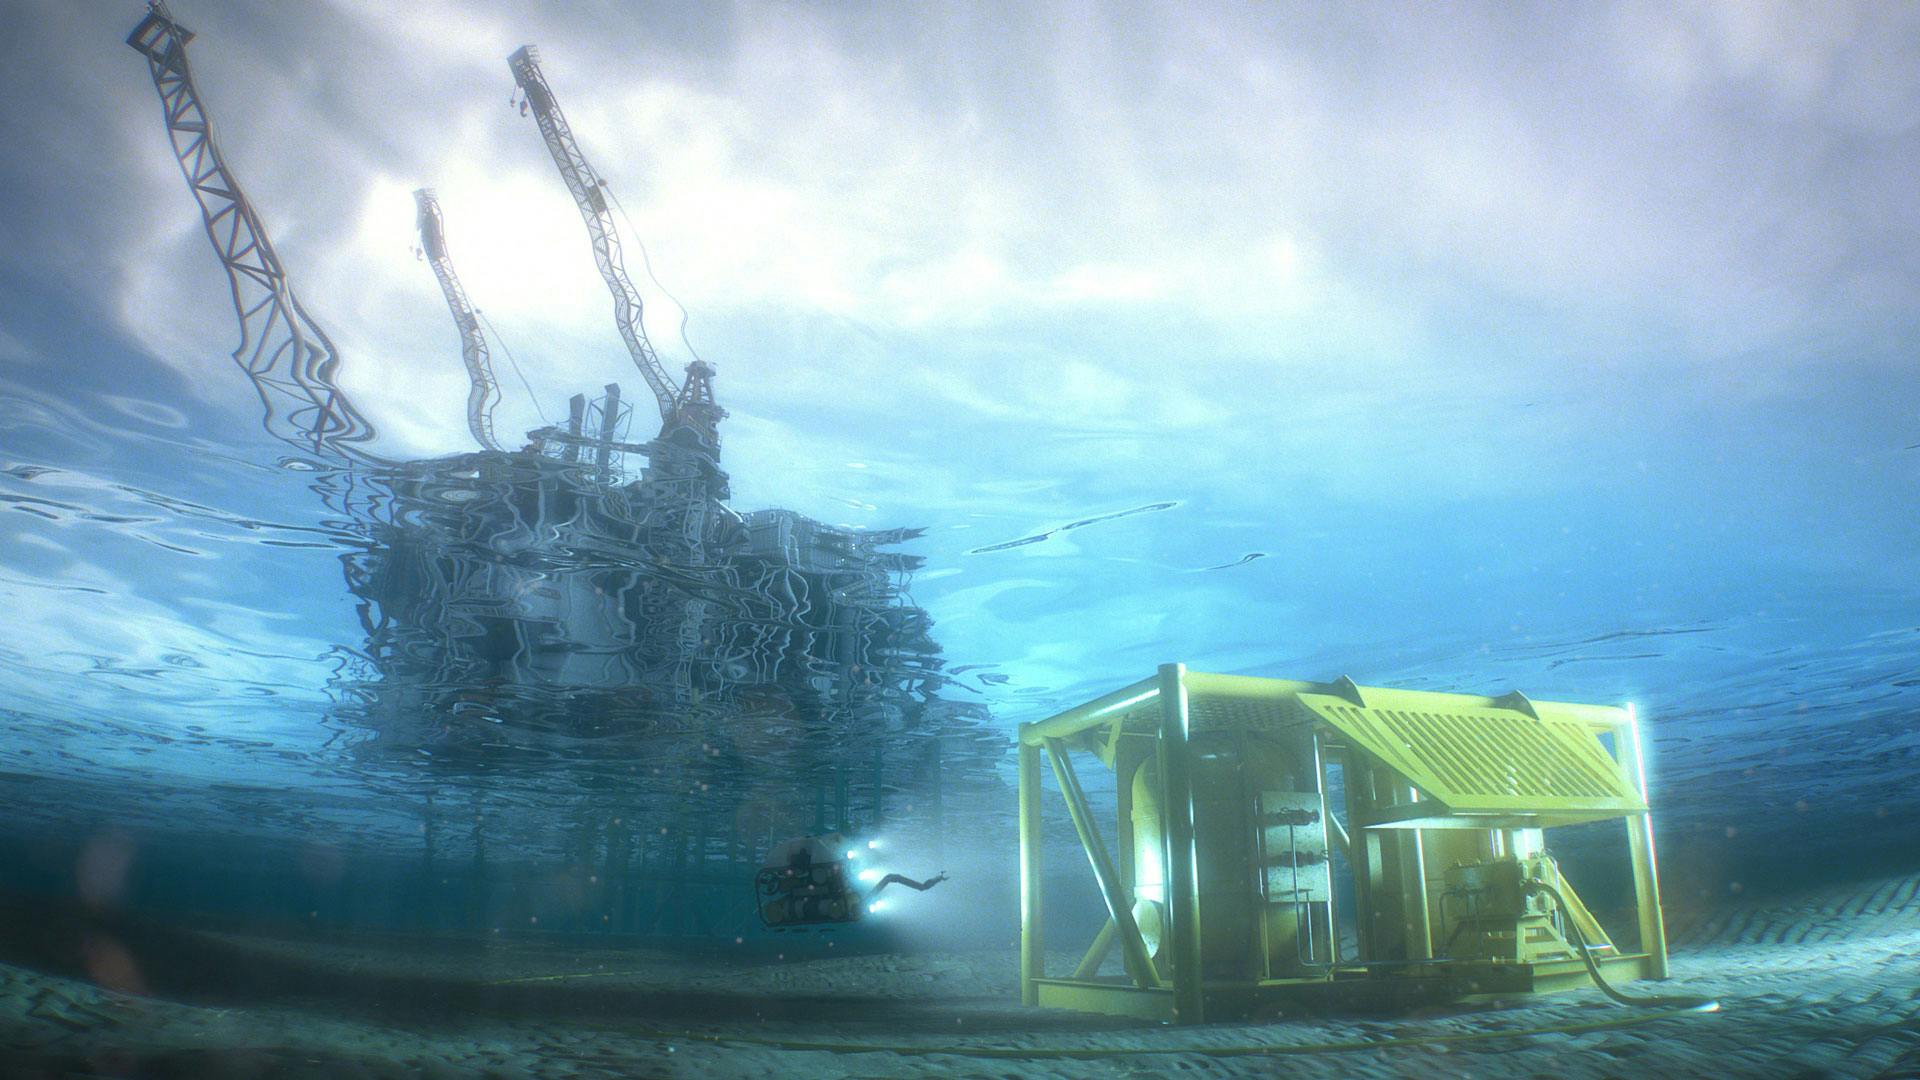 Image of subsea storage underwater, with a rig in the background above water